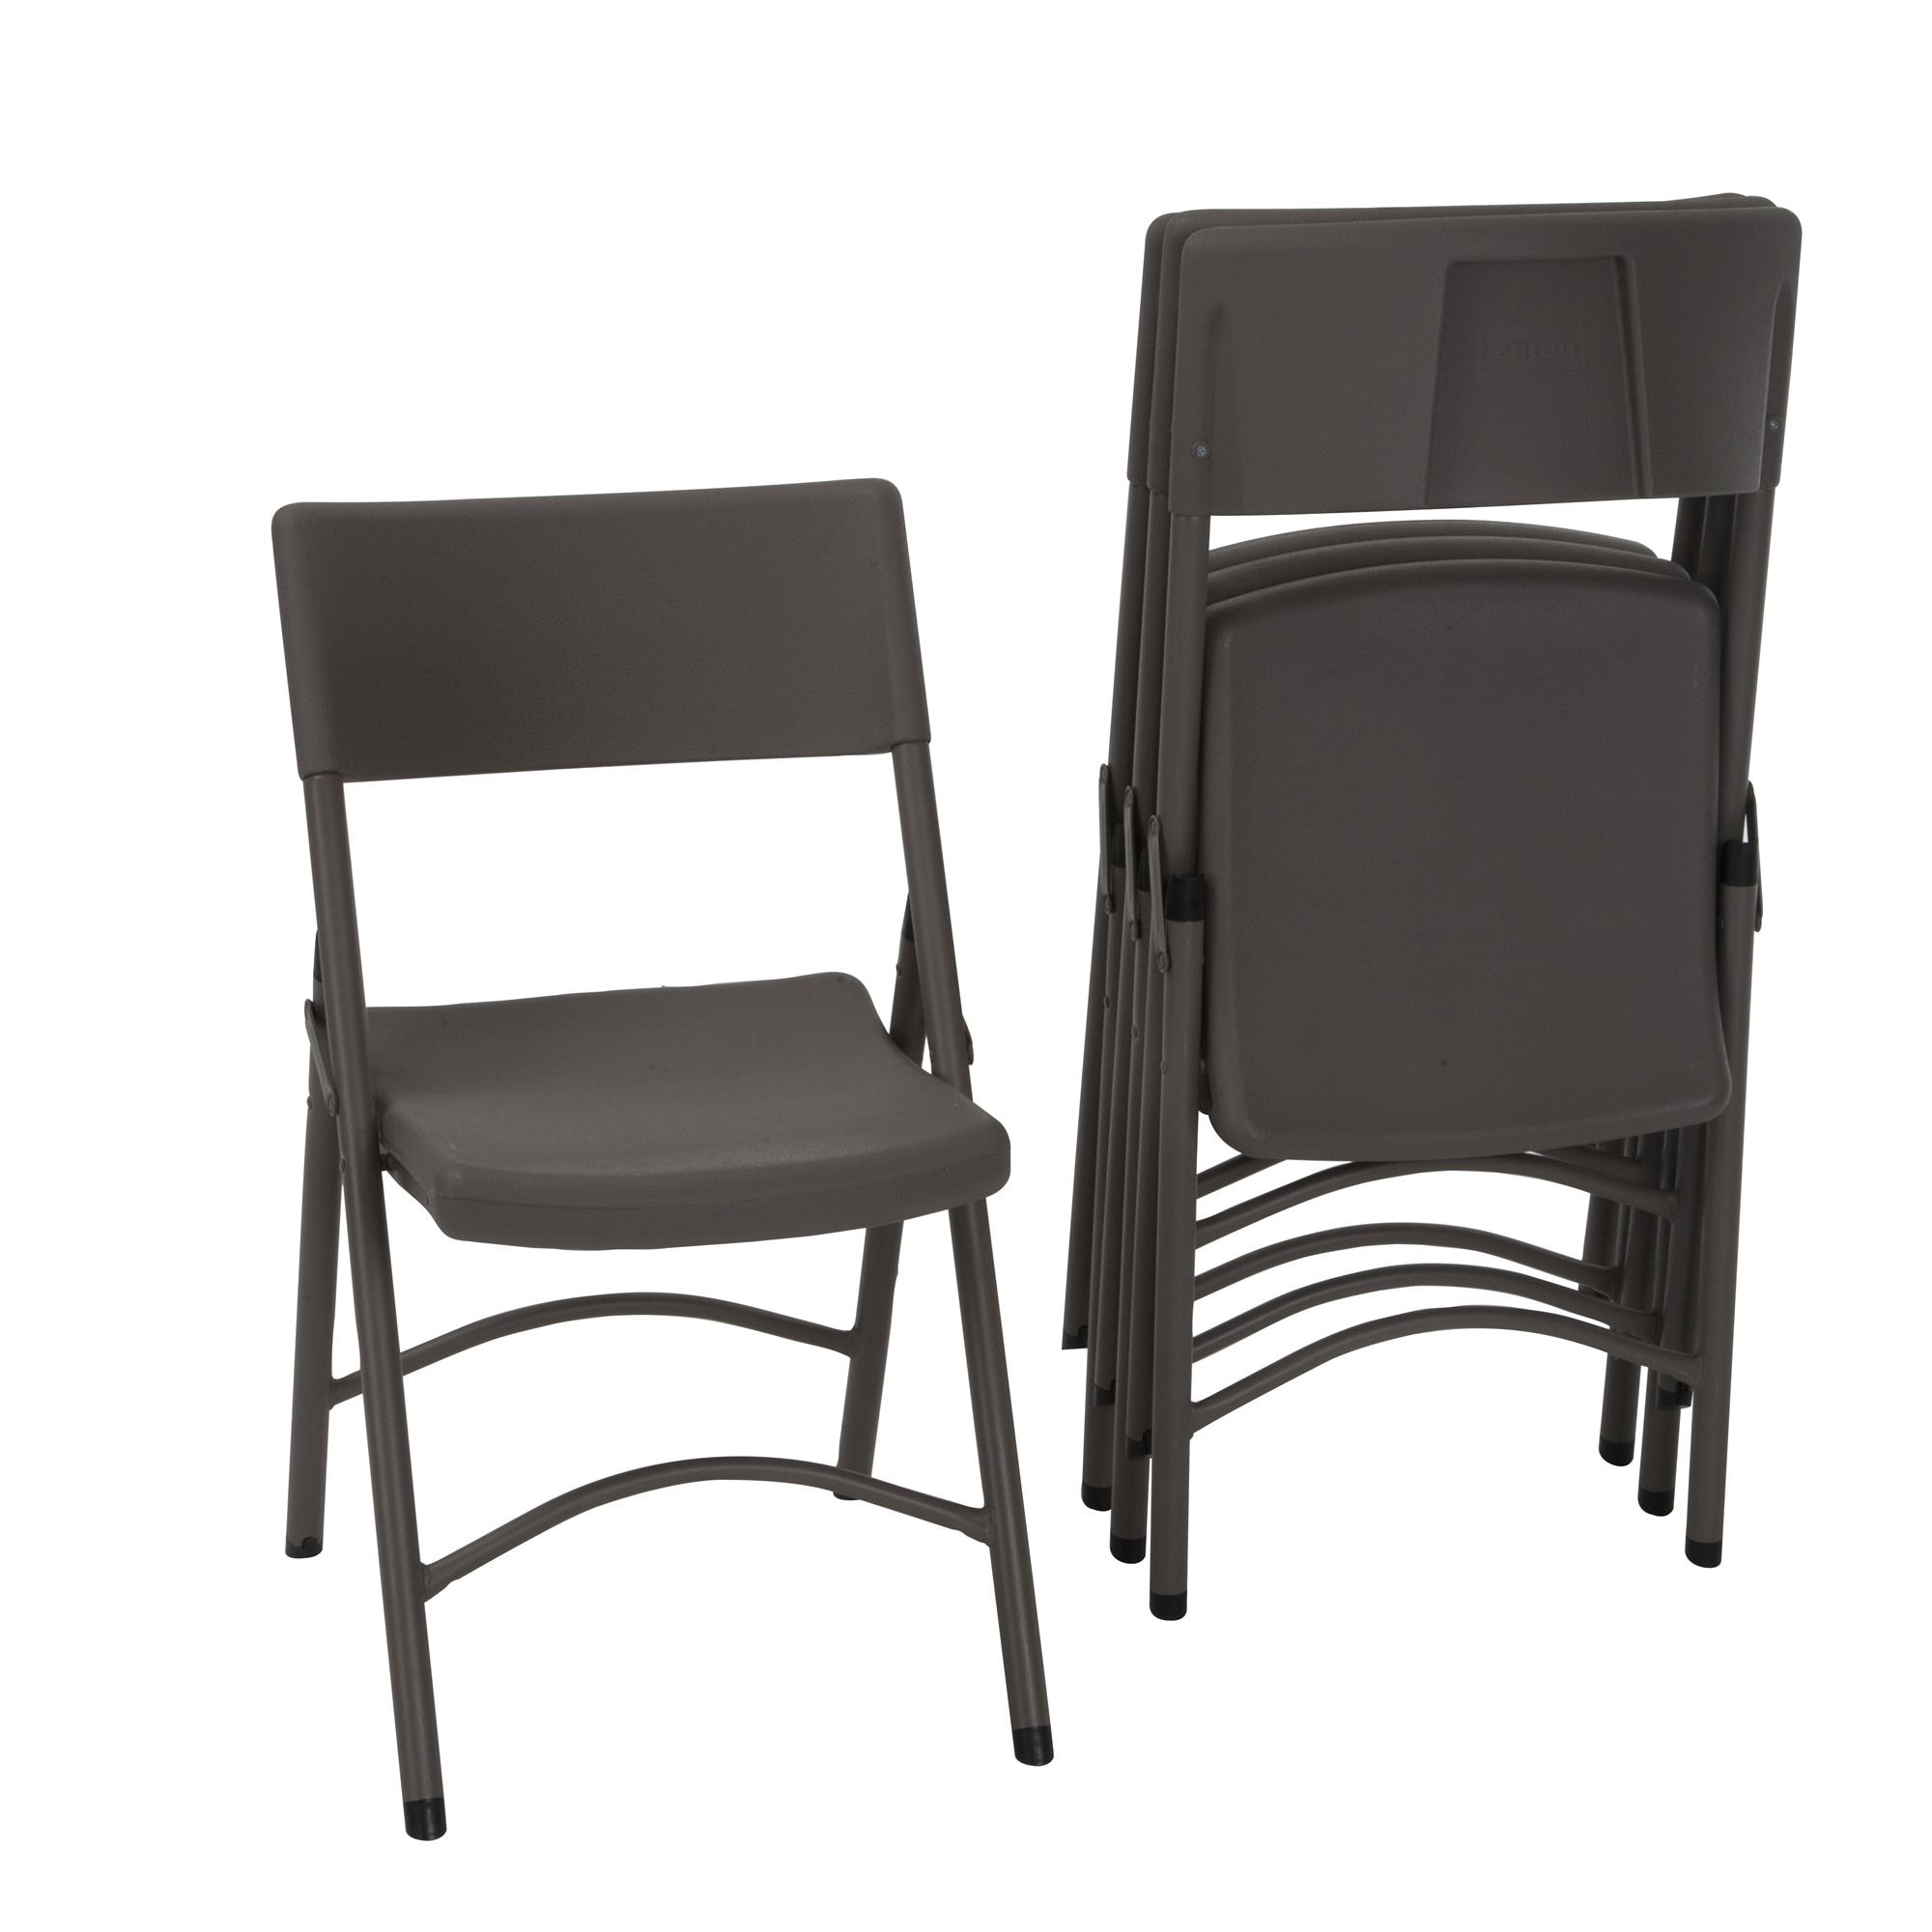 Cosco ZOWN Premium Commercial Blow Mold Banquet Folding Chair (4-pack)